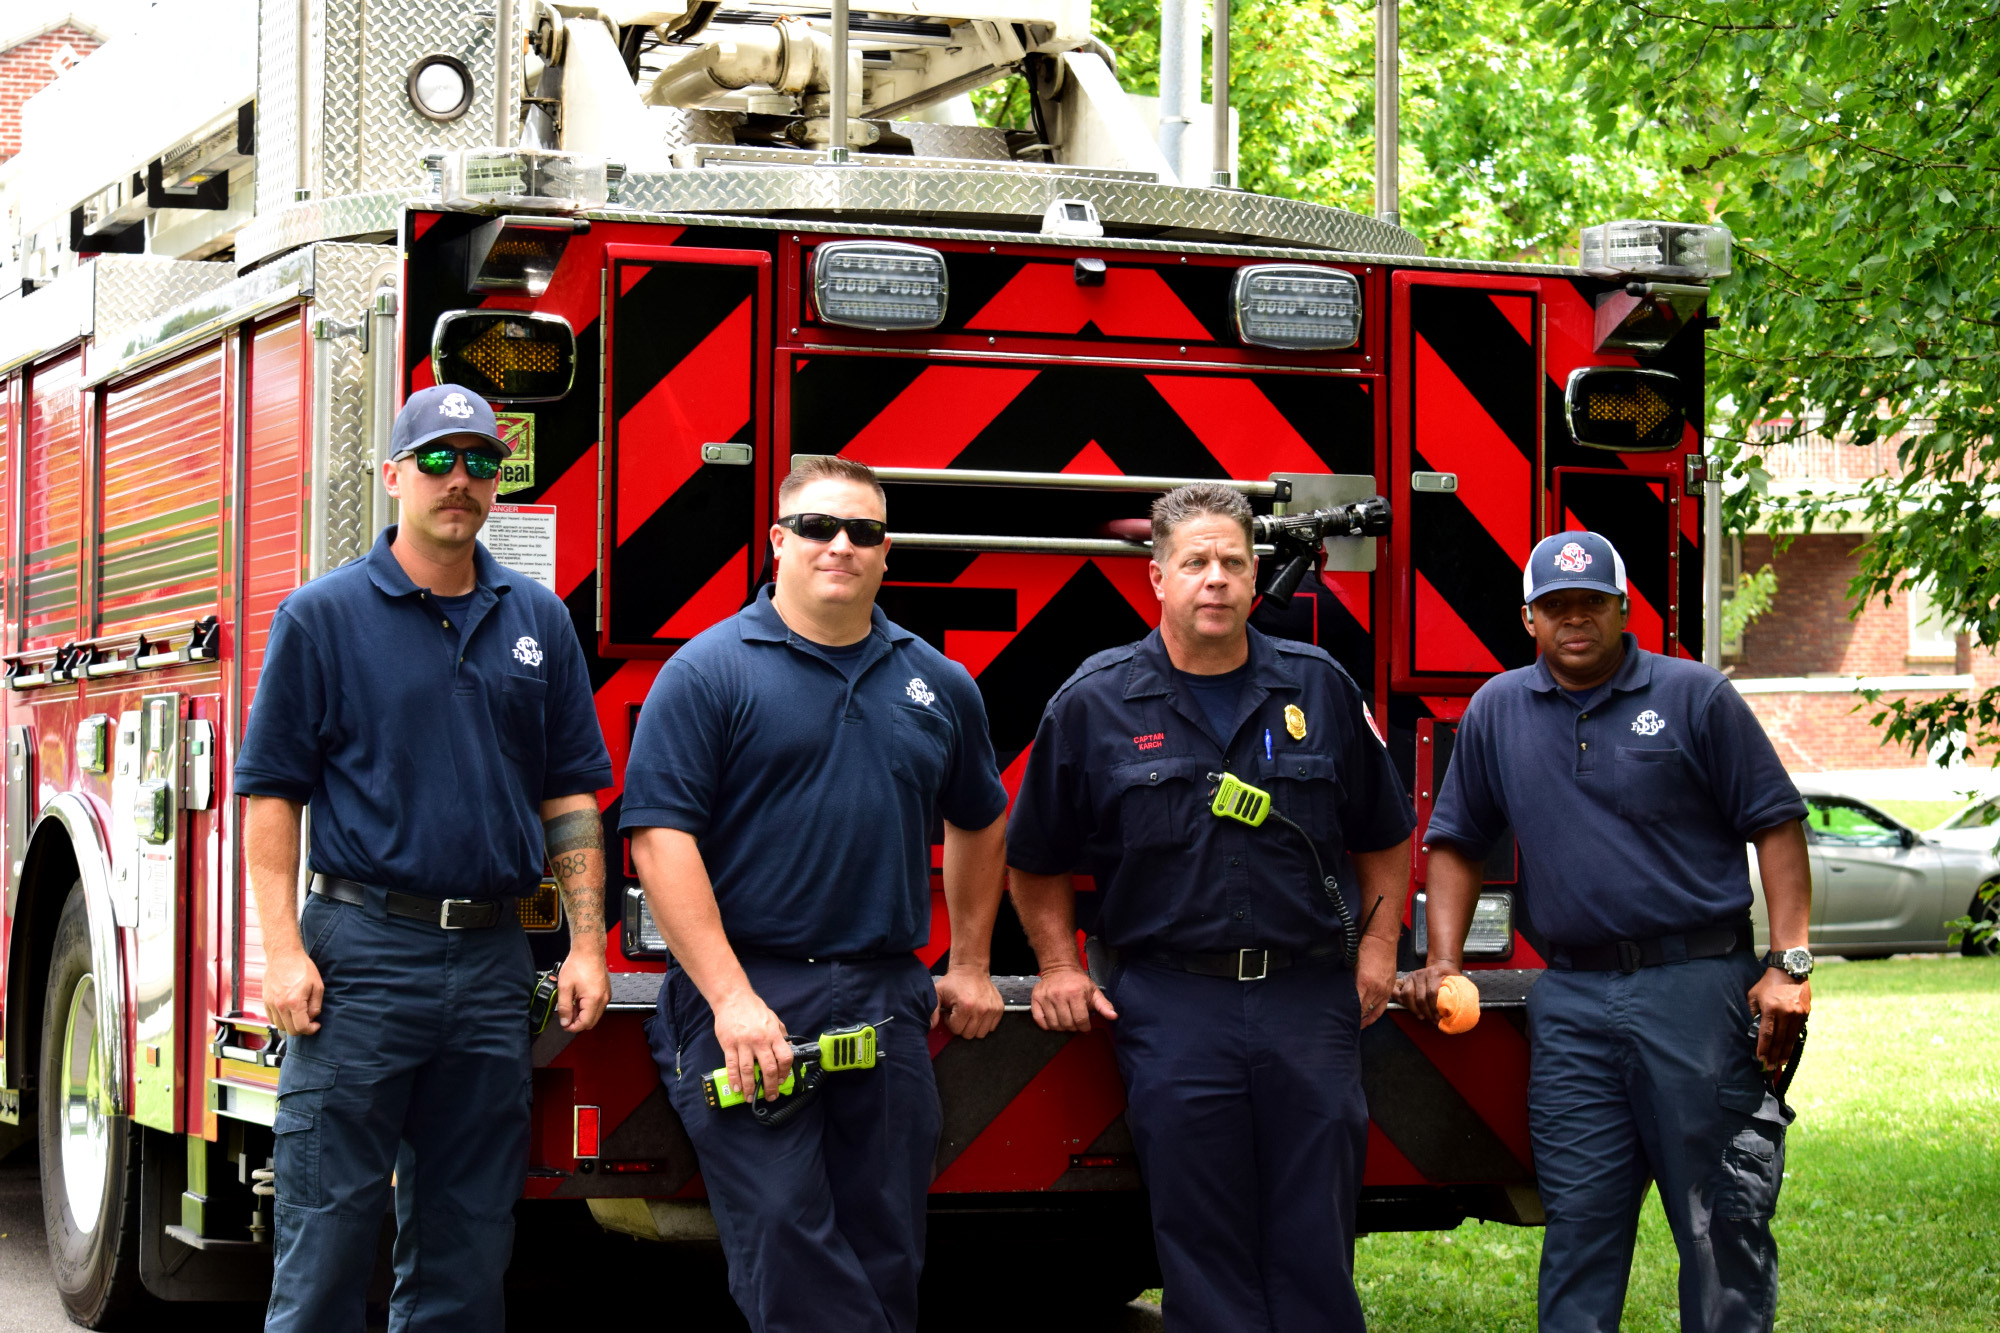 The St. Louis Fire Department at Marquette Community Day in Dutchtown, St. Louis, MO.